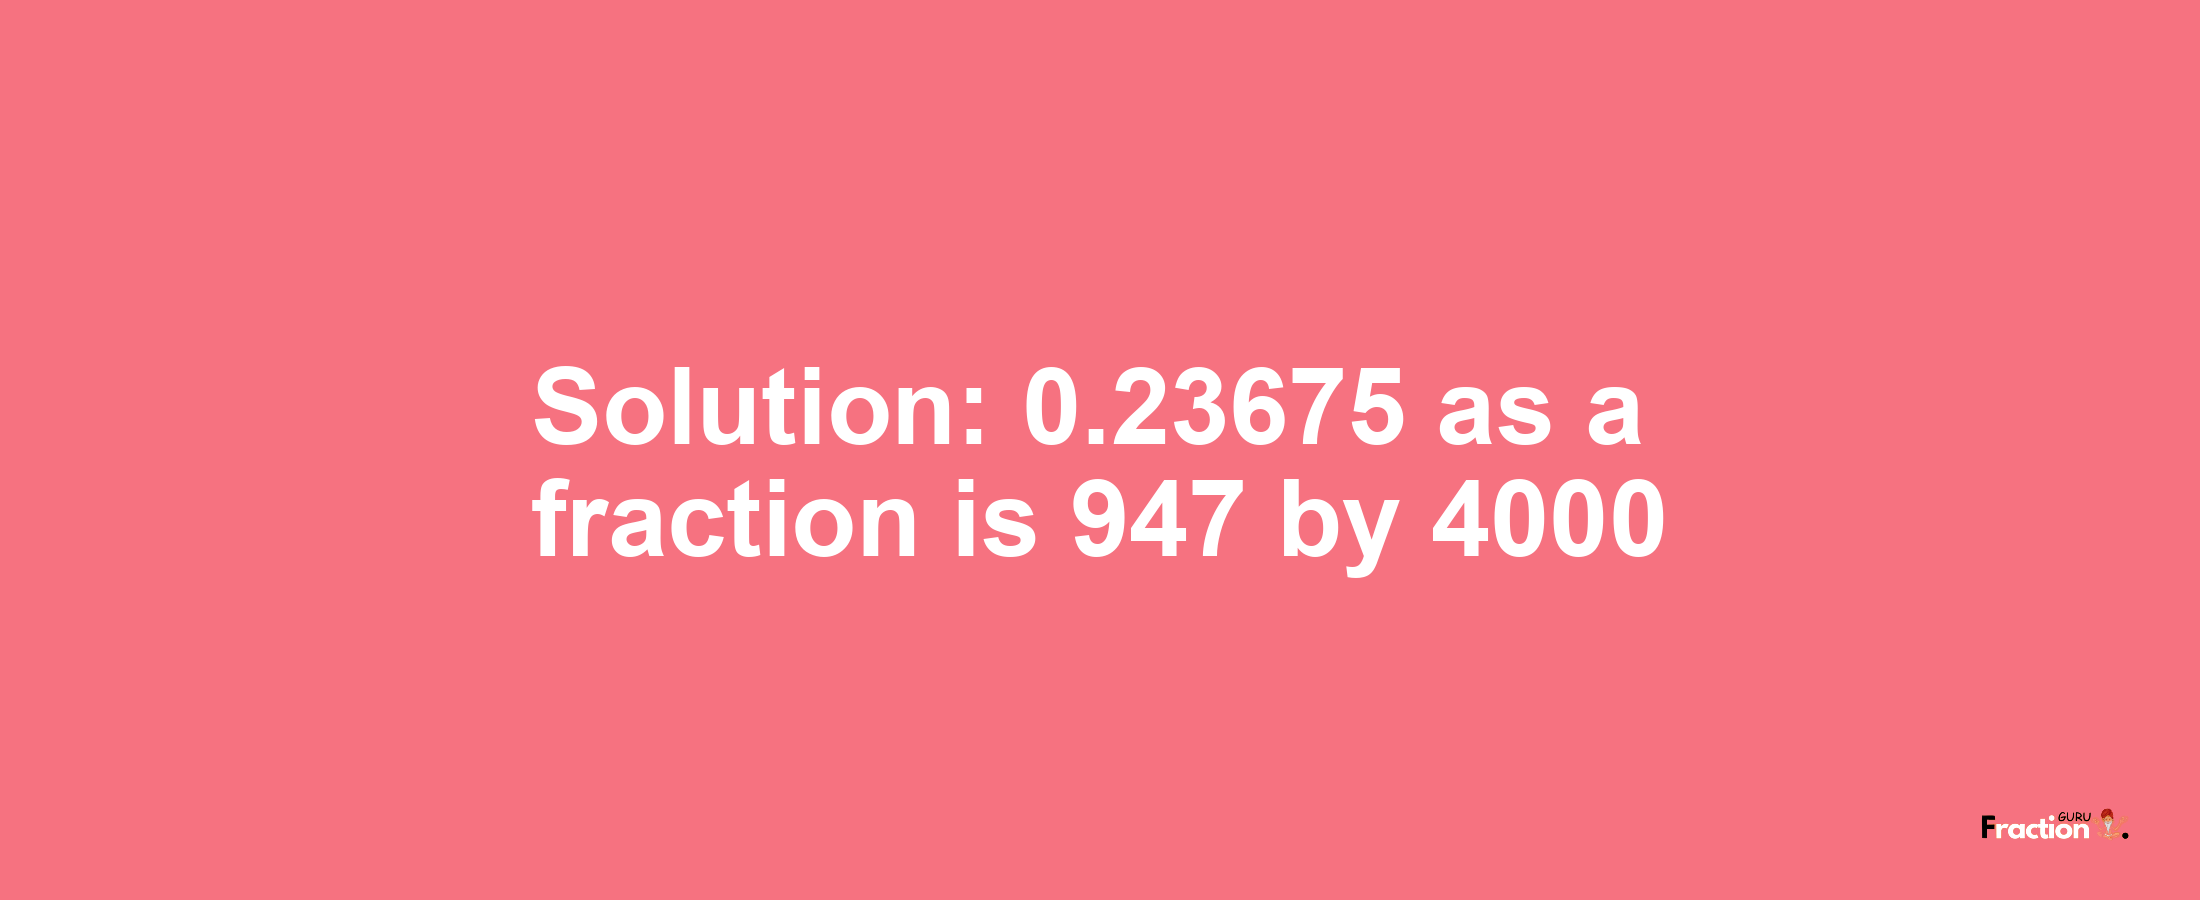 Solution:0.23675 as a fraction is 947/4000